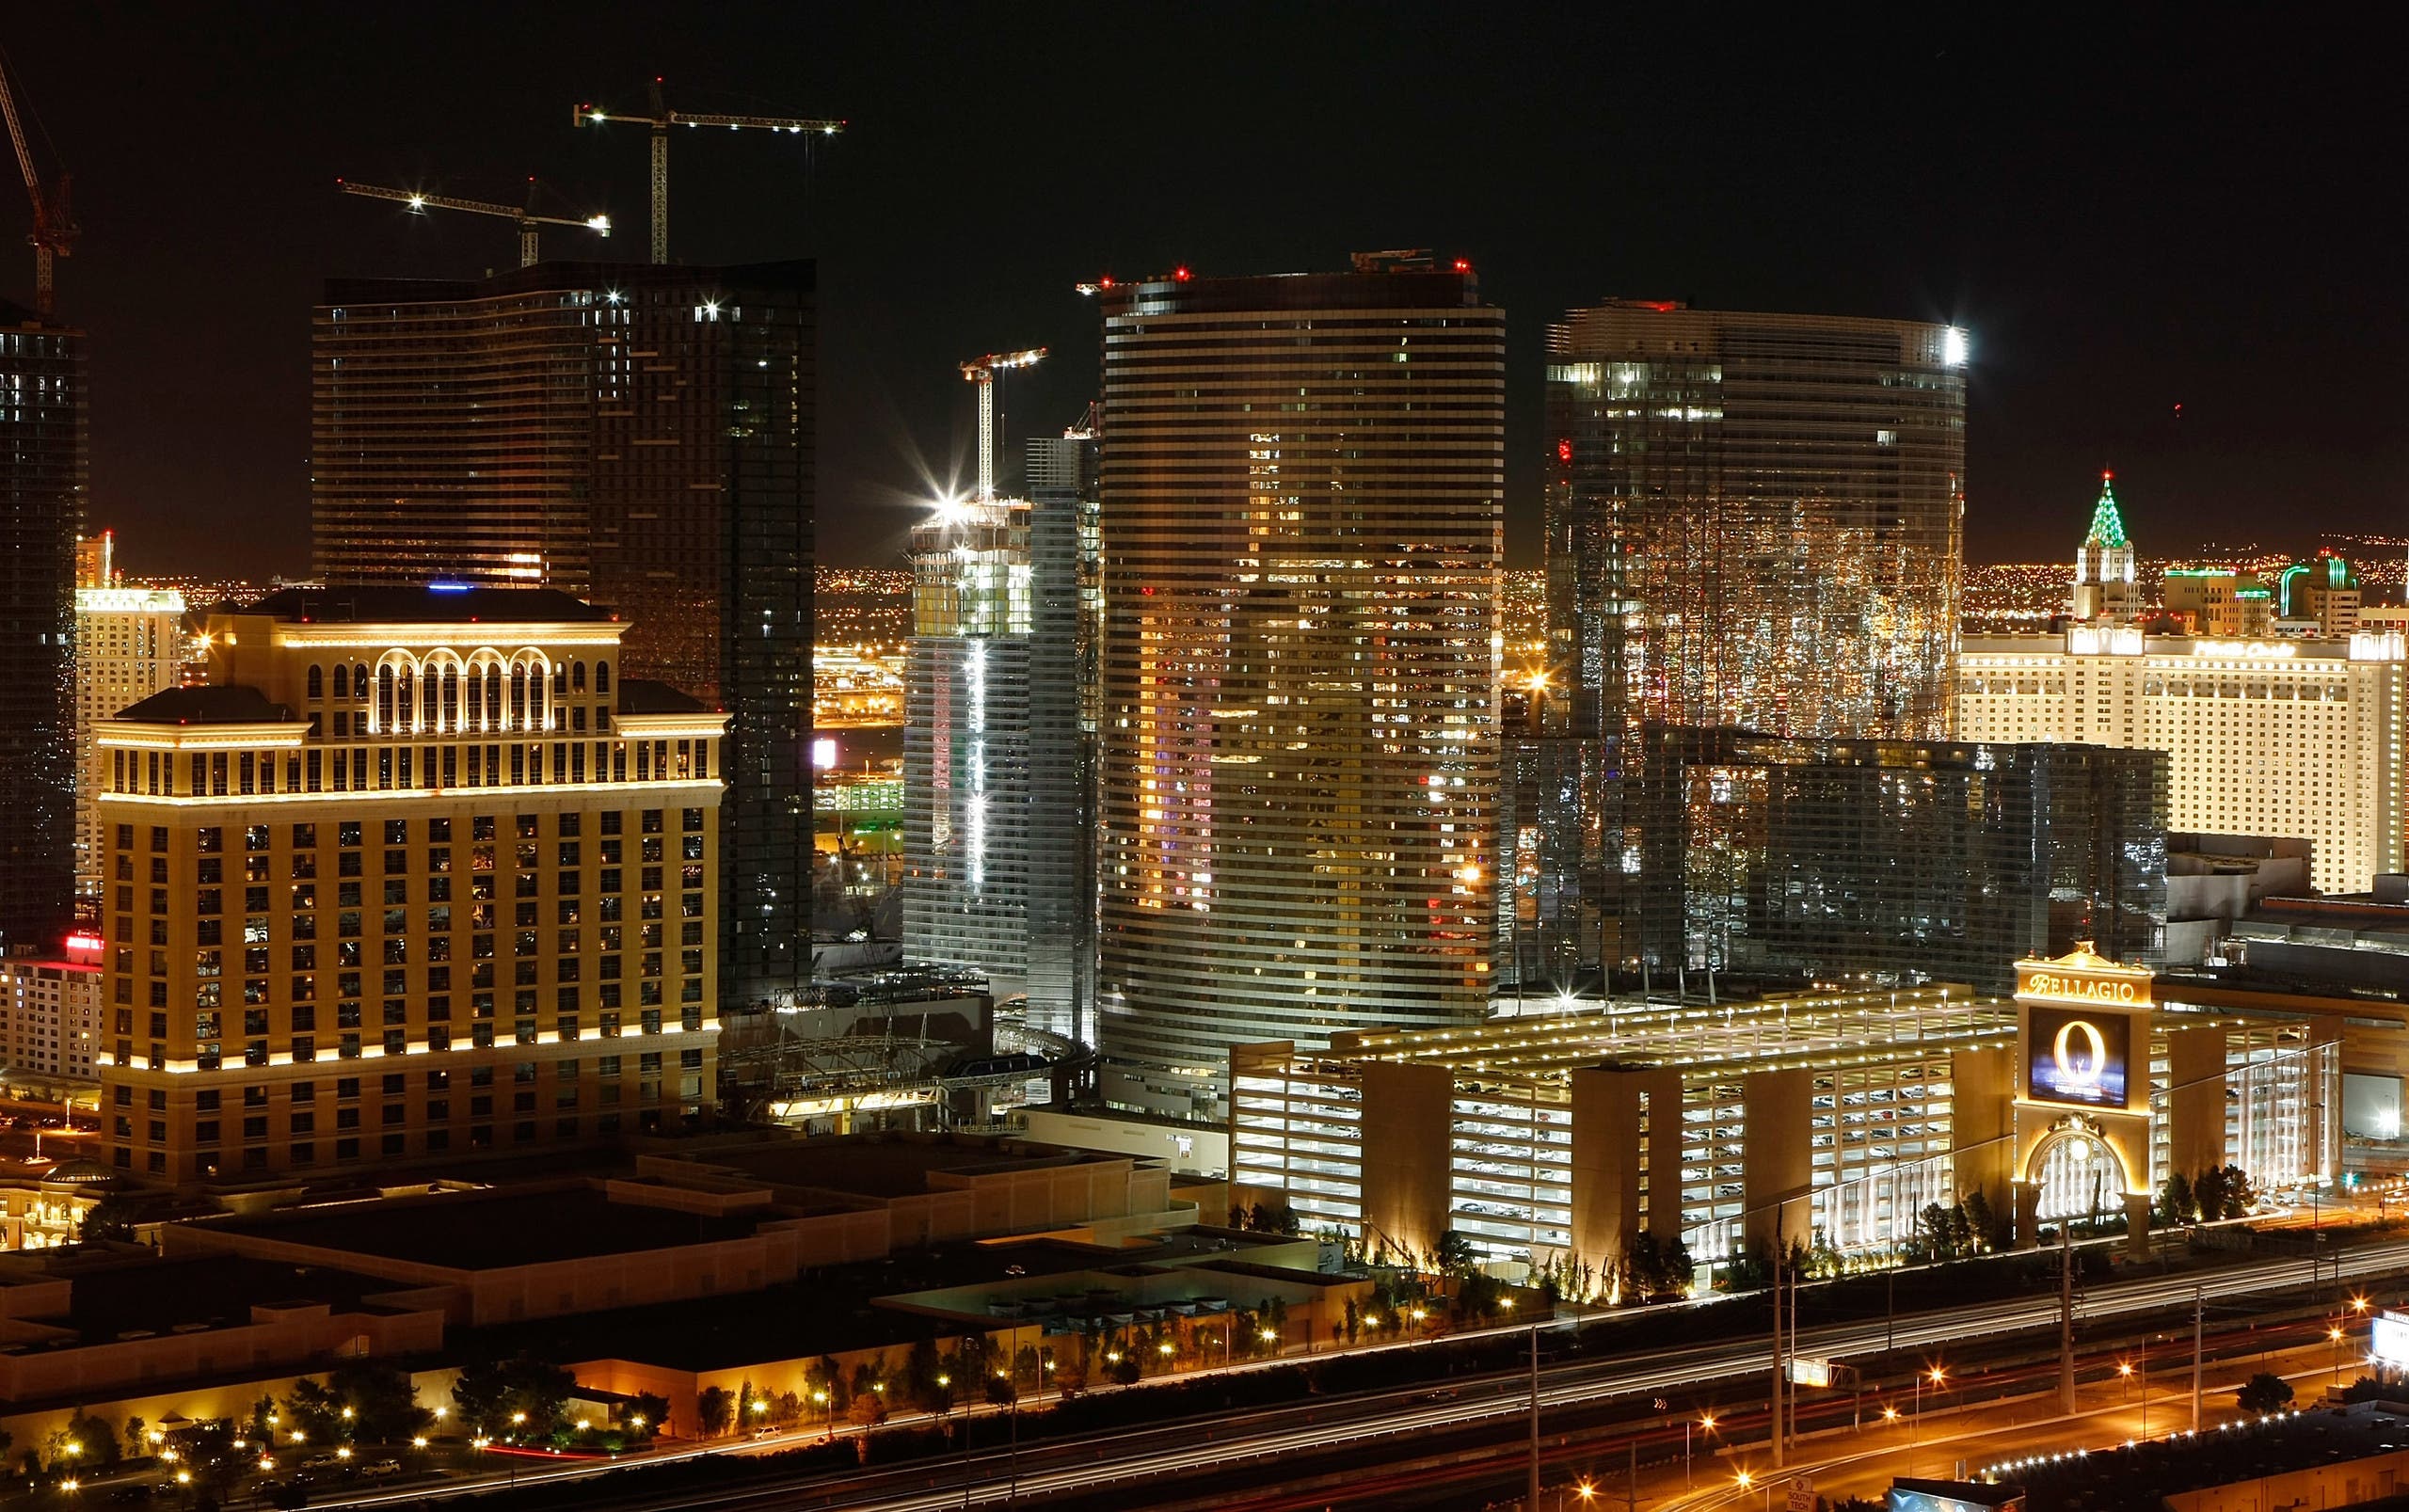 A view of part of the Bellagio and the CityCenter project under construction on the Las Vegas Strip seen from the Voodoo Lounge. (File photo: AFP)